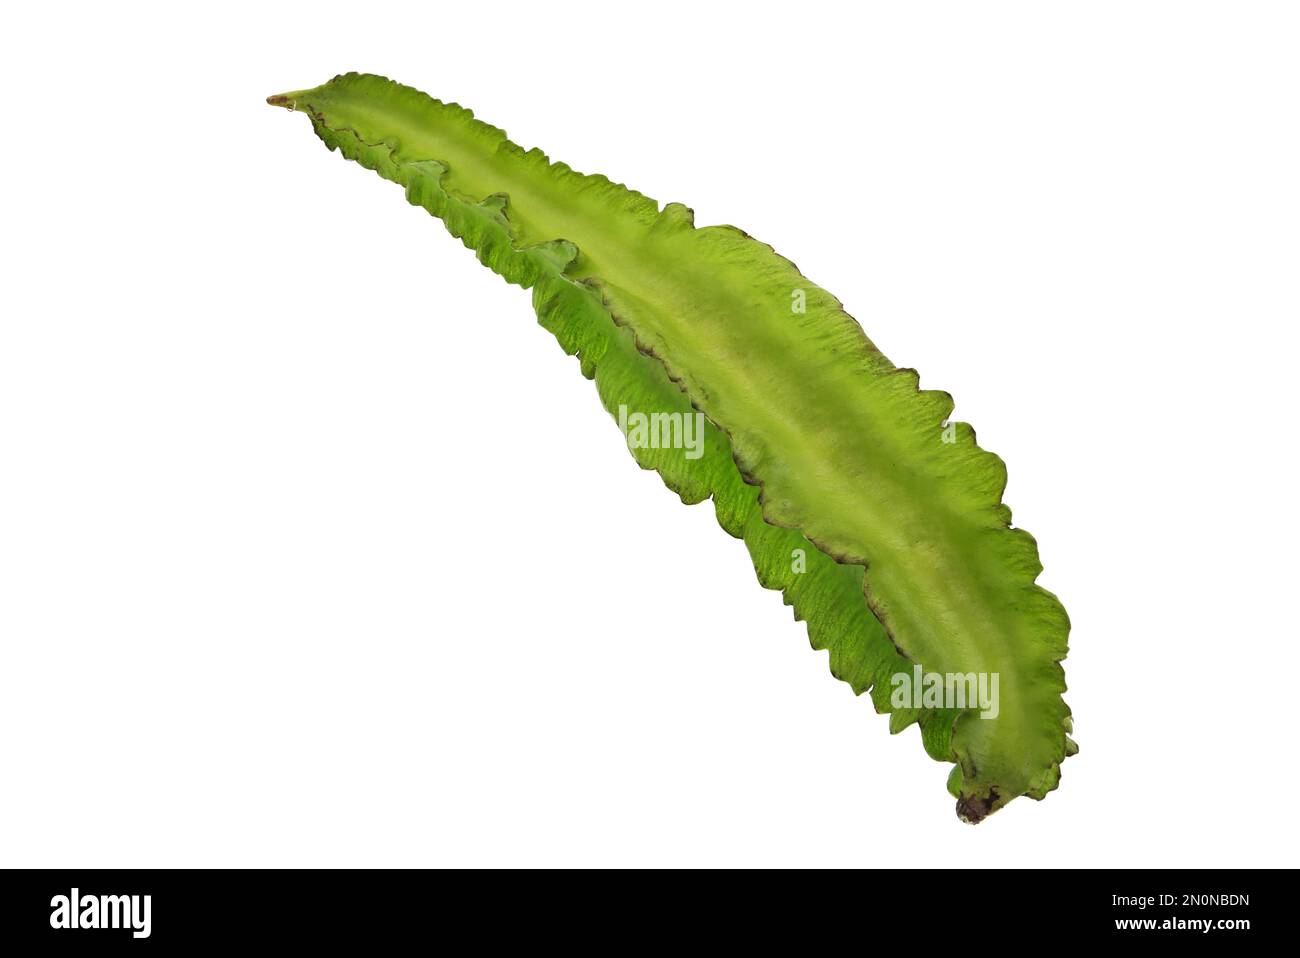 Winged bean, Psophocarpus tetragonolobus, is a tropical herbaceous legume plant widely used in South Asia. Stock Photo